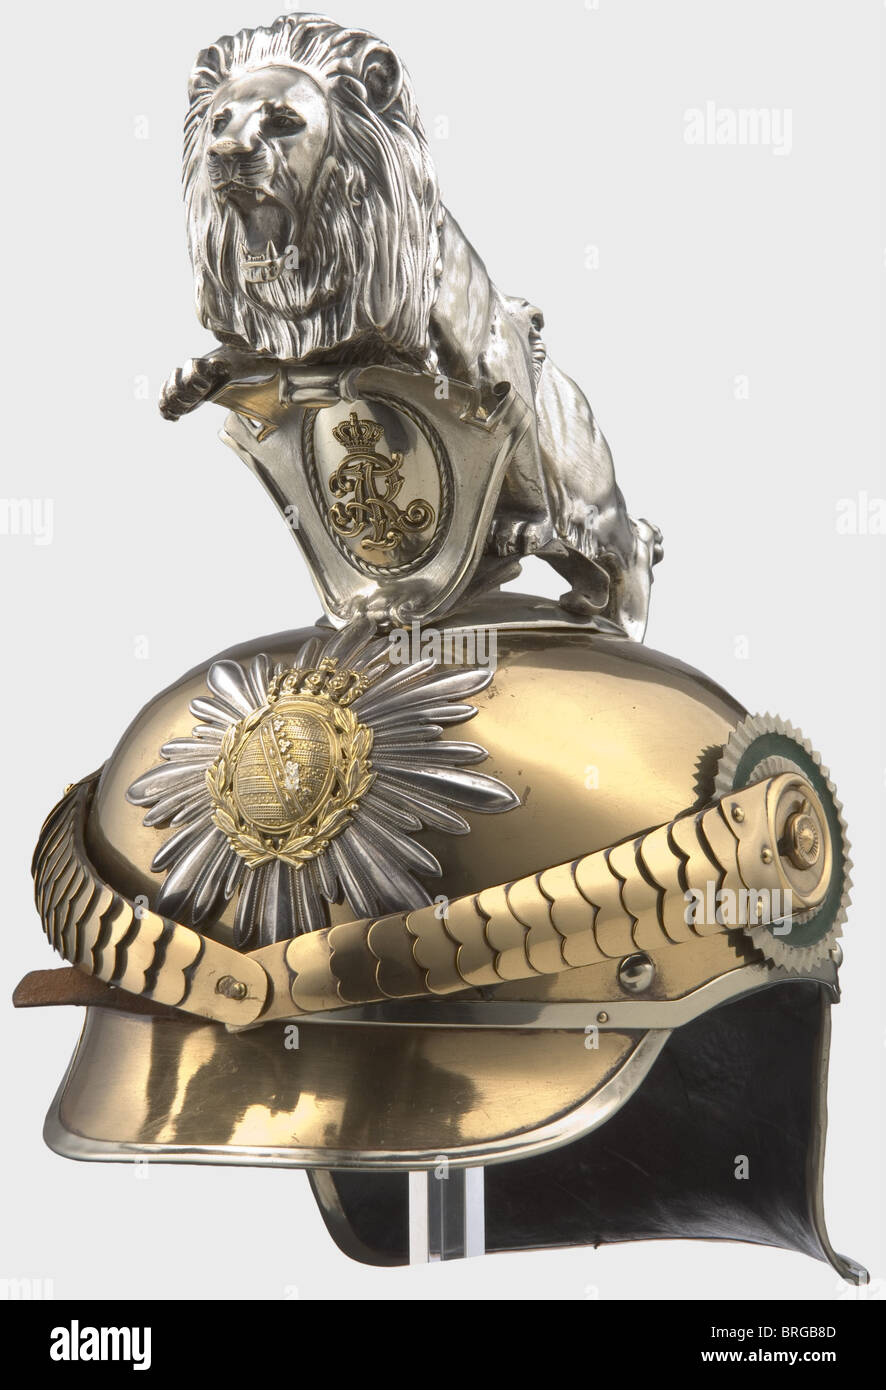 A model 1889/1907 helmet for enlisted men,of the Royal Saxon Gardereiter-Regiment Tombac skull,silver-plated star with superimposed coat of arms,convex metal chinscales on '91' button.Enlisted personnel cockades.Inside the maker's name 'G.H.Osang Dresden 1915',size '55',on top item number '34'.Black leather lining.The rear peak is covered with black leather,the front peak painted green on the inside.Silver-plated parade lion above the cipher shield.Rare helmet in beautiful condition,traces of mechanical cleaning on skull and lion.,historic,histo,Additional-Rights-Clearences-Not Available Stock Photo